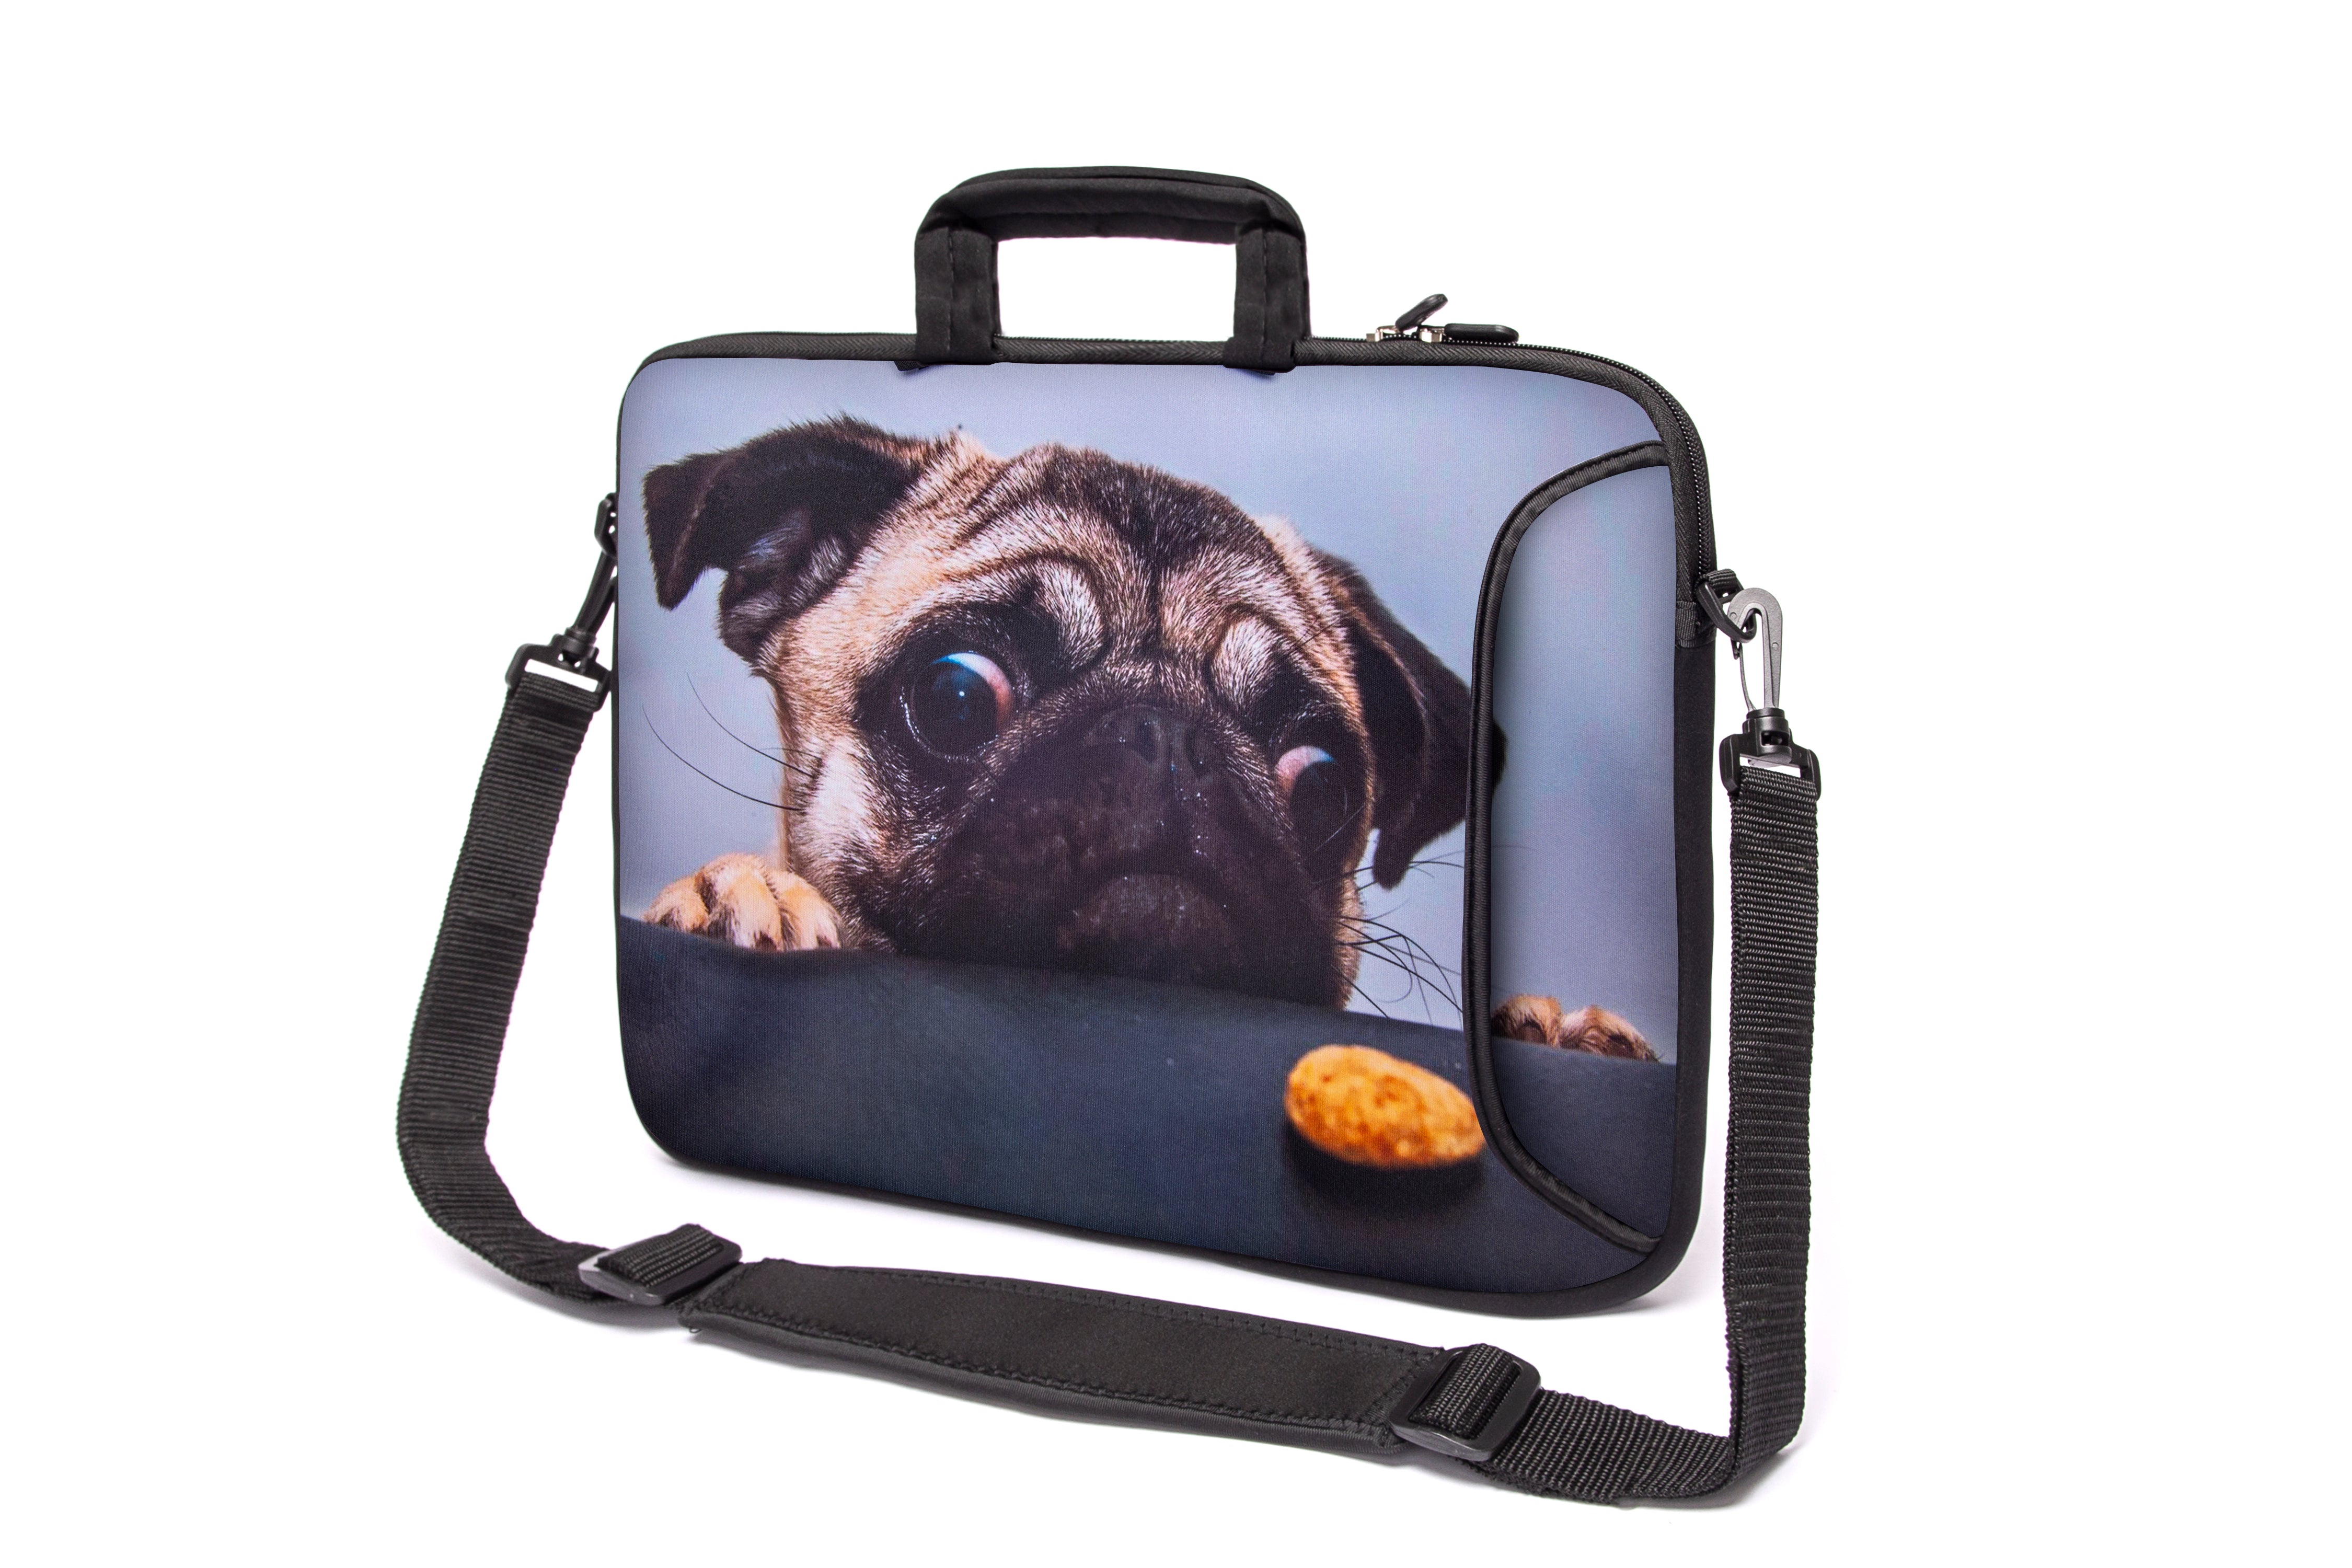 15"- 15.6" (inch) LAPTOP BAG CARRY CASE/BAG WITH HANDLE & STRAP NEOPRENE FOR LAPTOPS/NOTEBOOKS, *Mops*